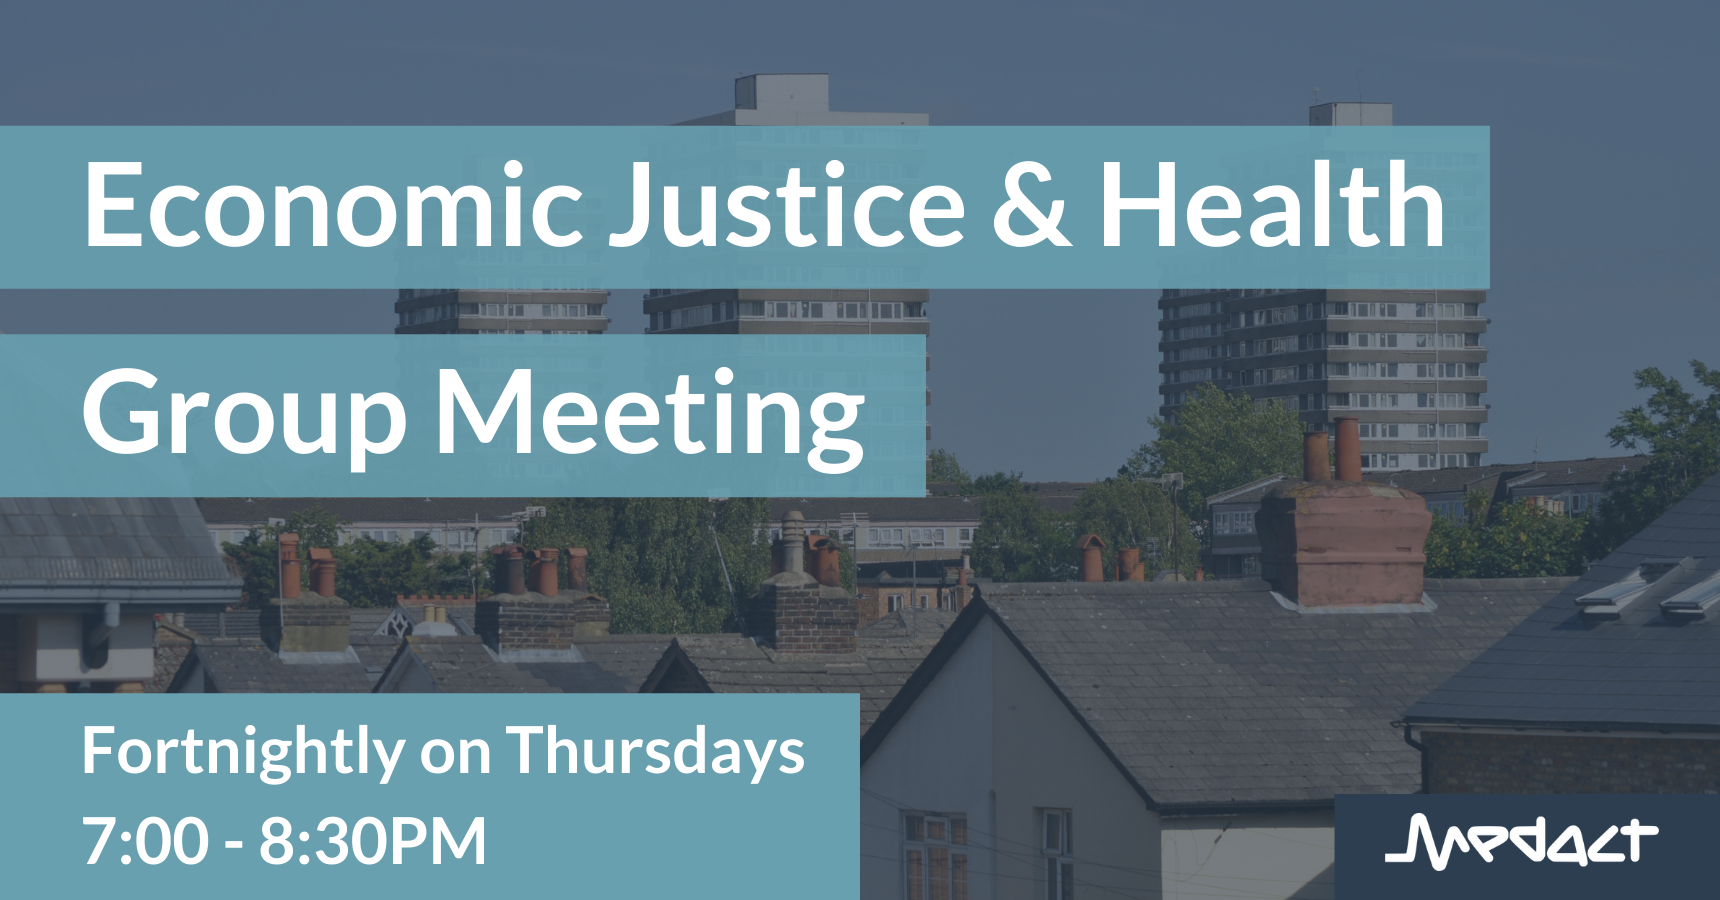 Economic Justice & Health Group Meeting